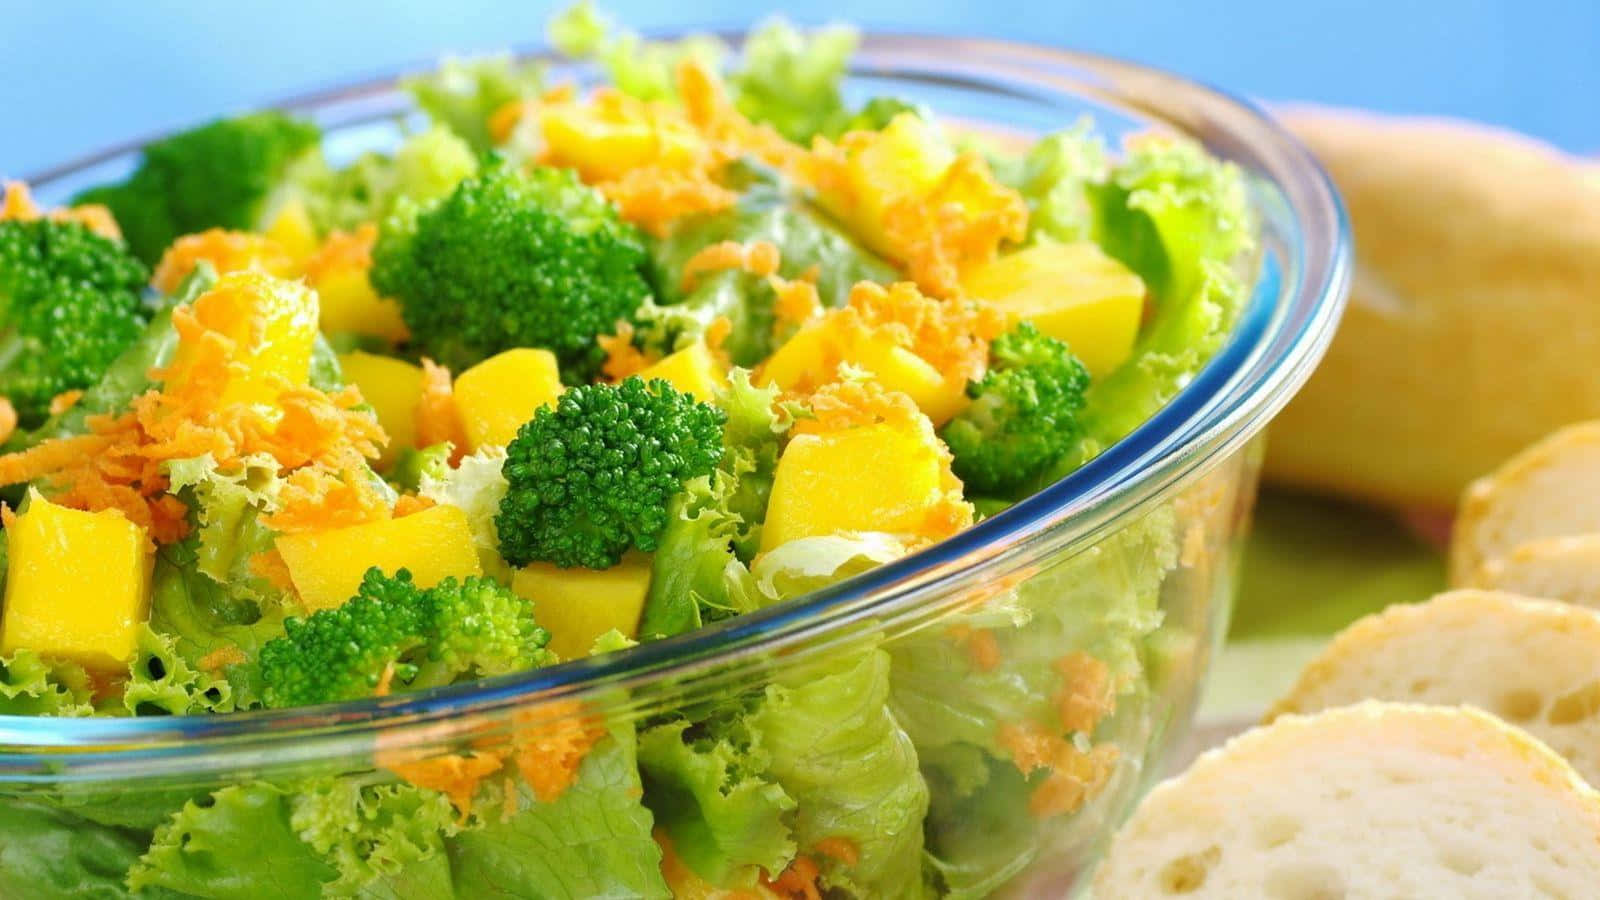 Healthy Food Green Vegetable Salad Picture